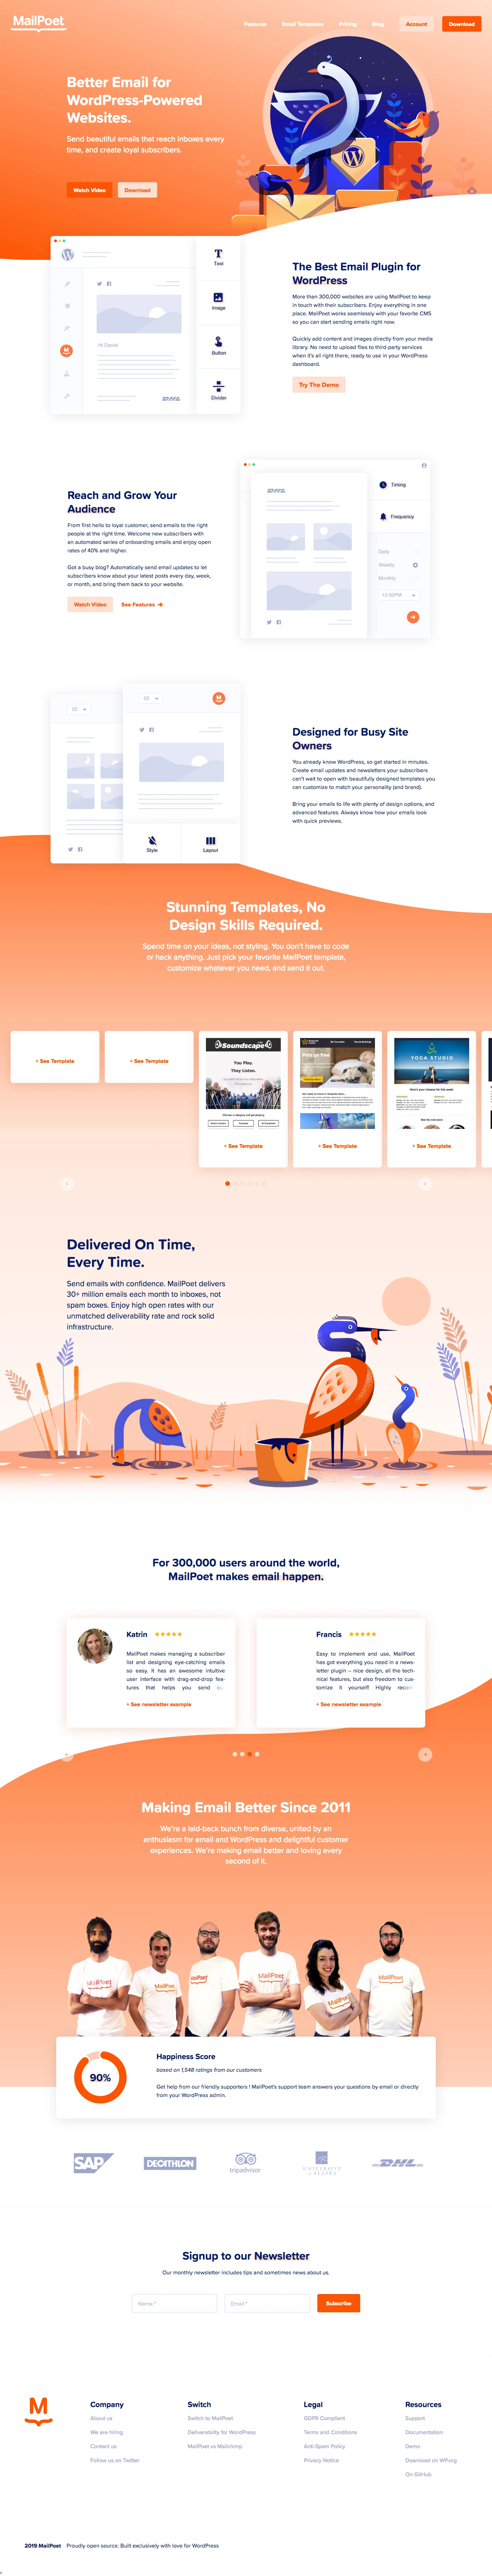 MailPoet Landing Page Example: Trusted by 300,000 websites. Save time by preparing your newsletter directly in WordPress. Includes email marketing automation, including for WooCommerce.